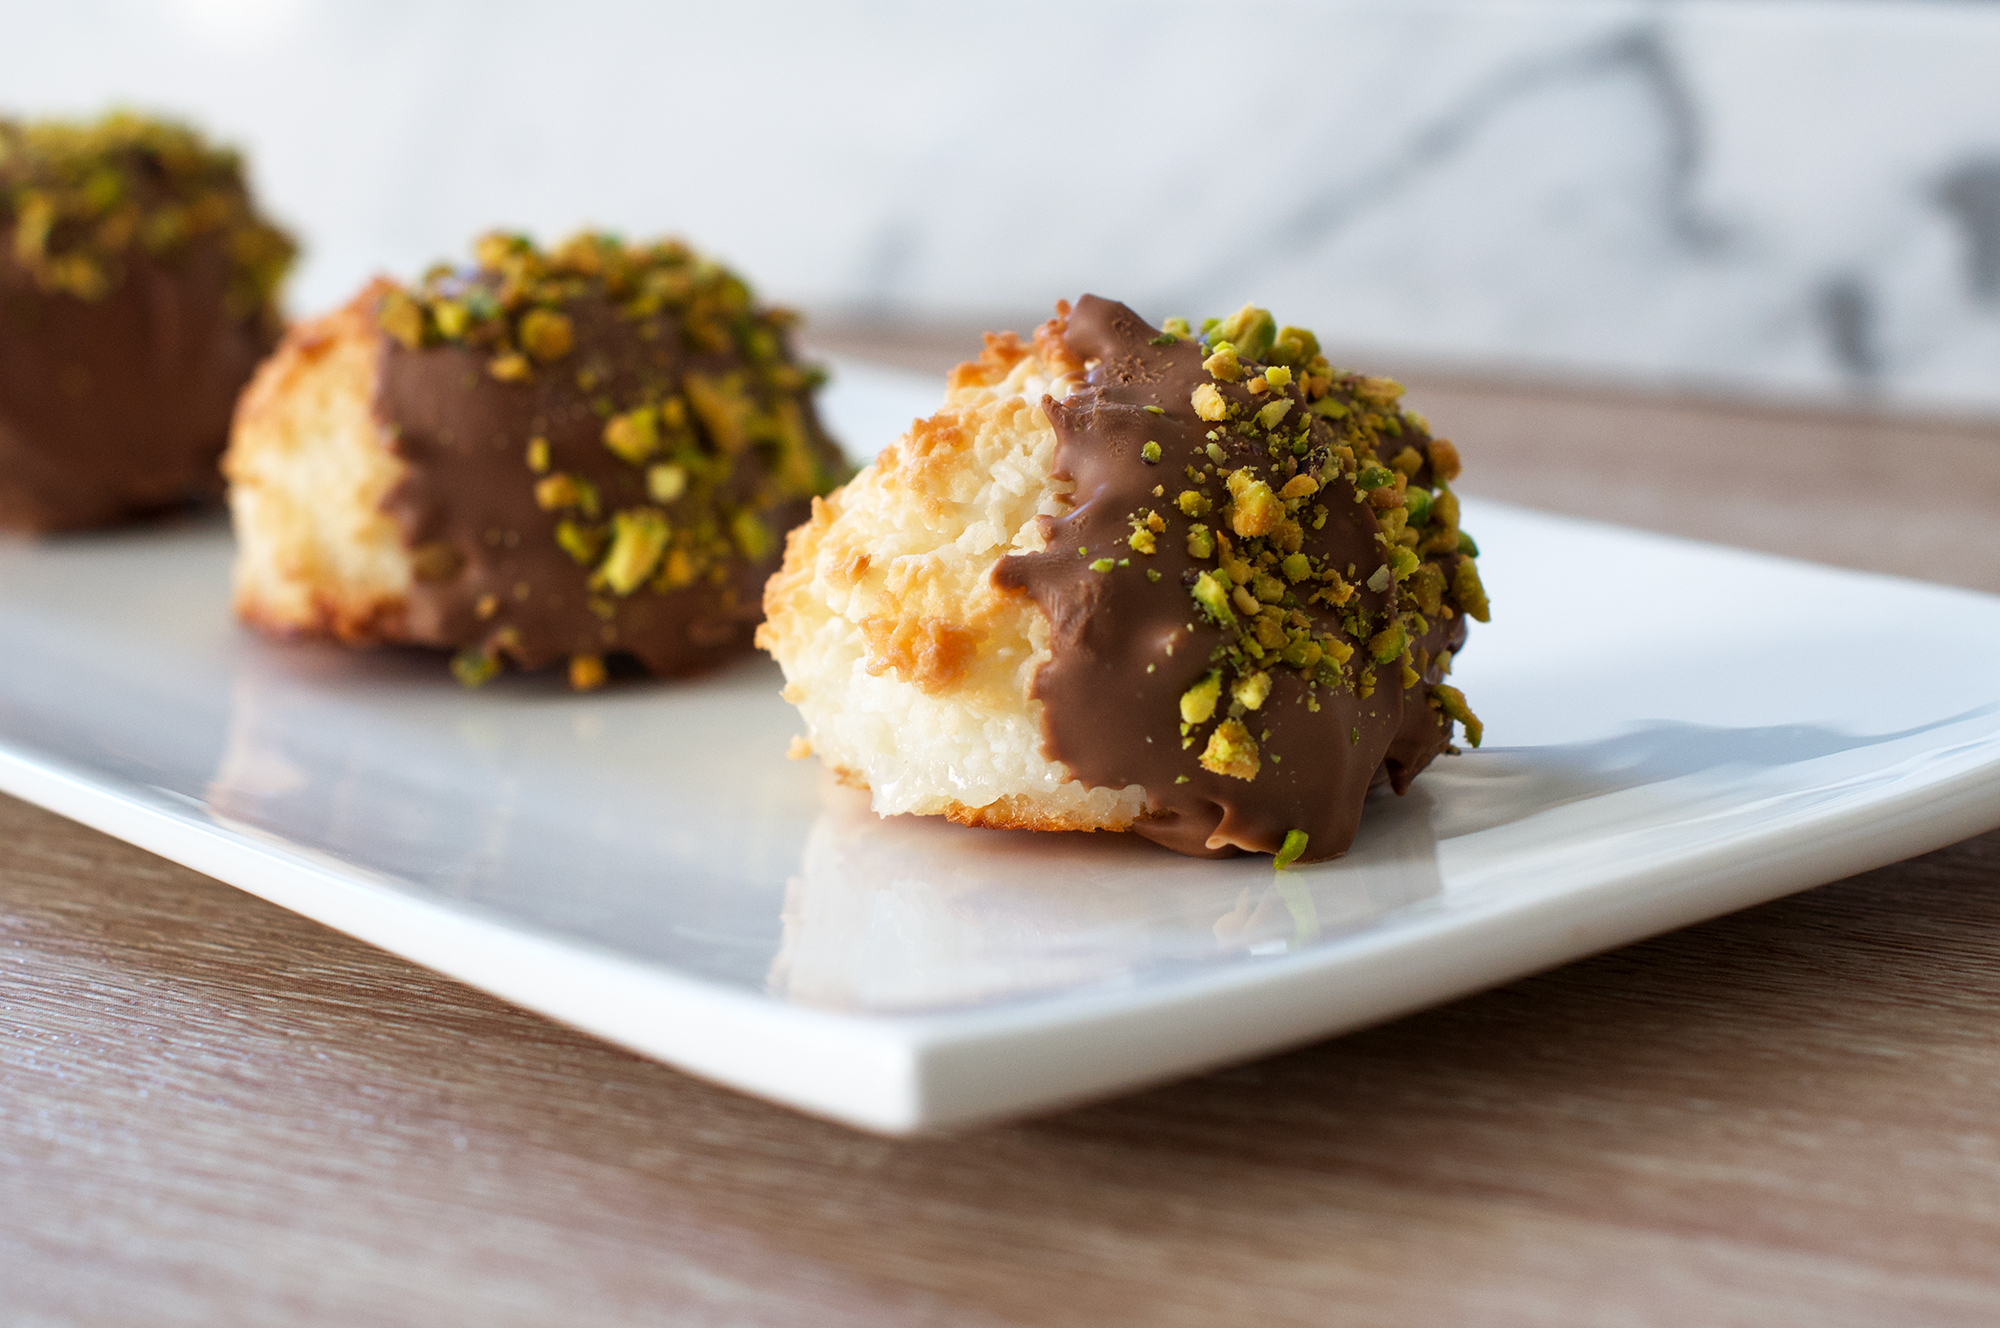 Recipe for Coconut Macaroons with Chocolate and Pistachio